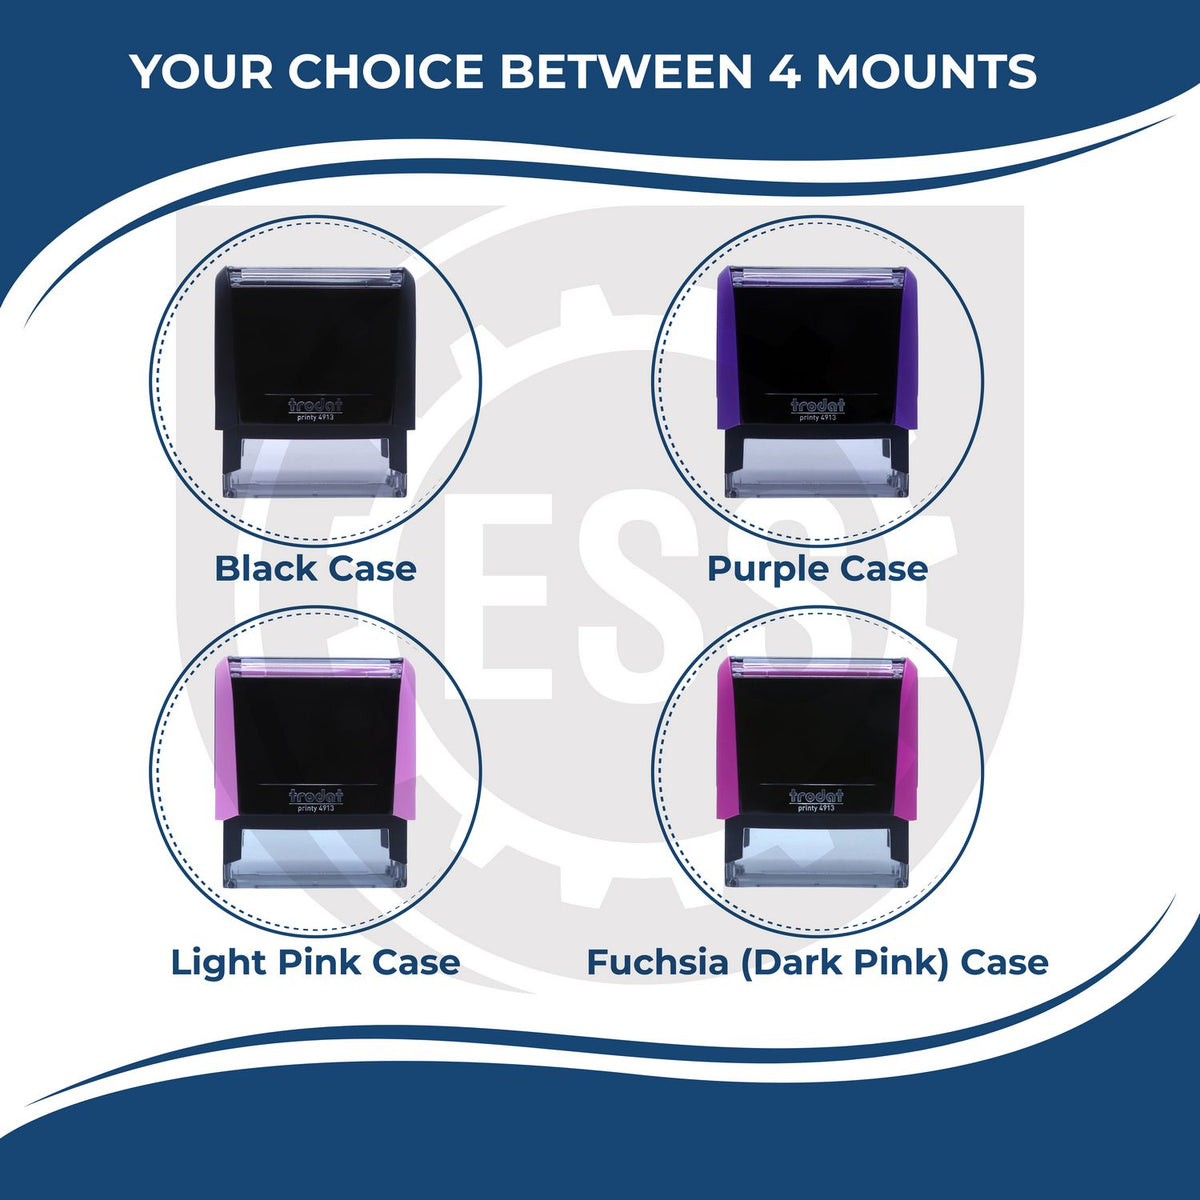 A picture of different colored mounts for the Self-Inking Rectangular Idaho Notary Stamp featurning a Red, Blue or Black Mount